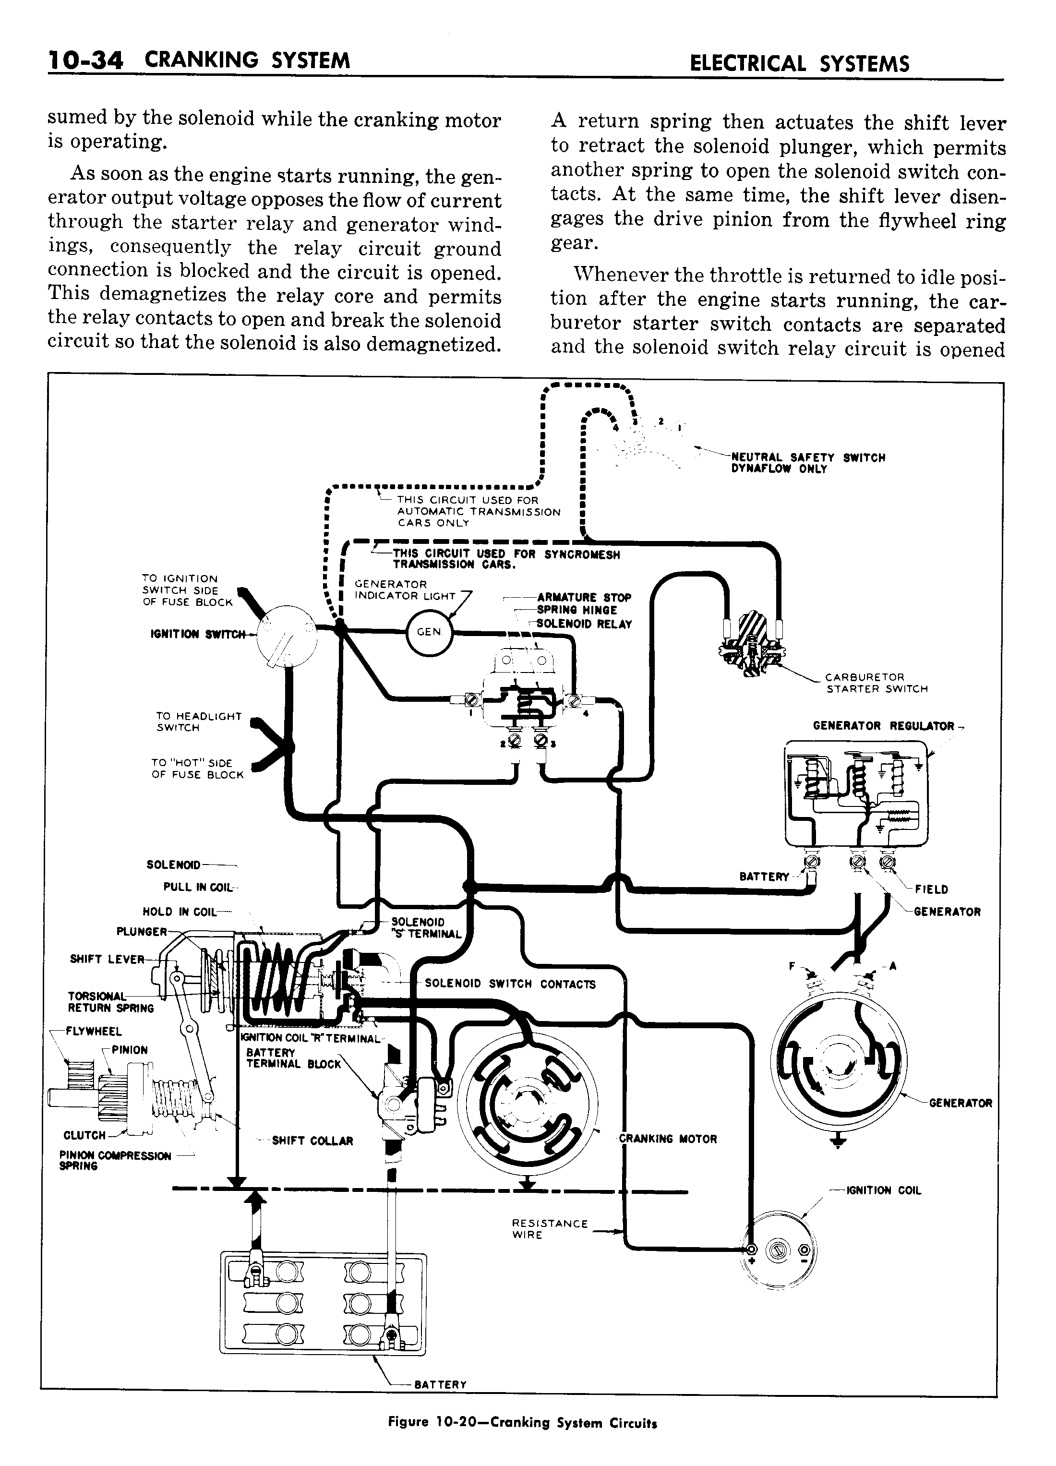 n_11 1960 Buick Shop Manual - Electrical Systems-034-034.jpg